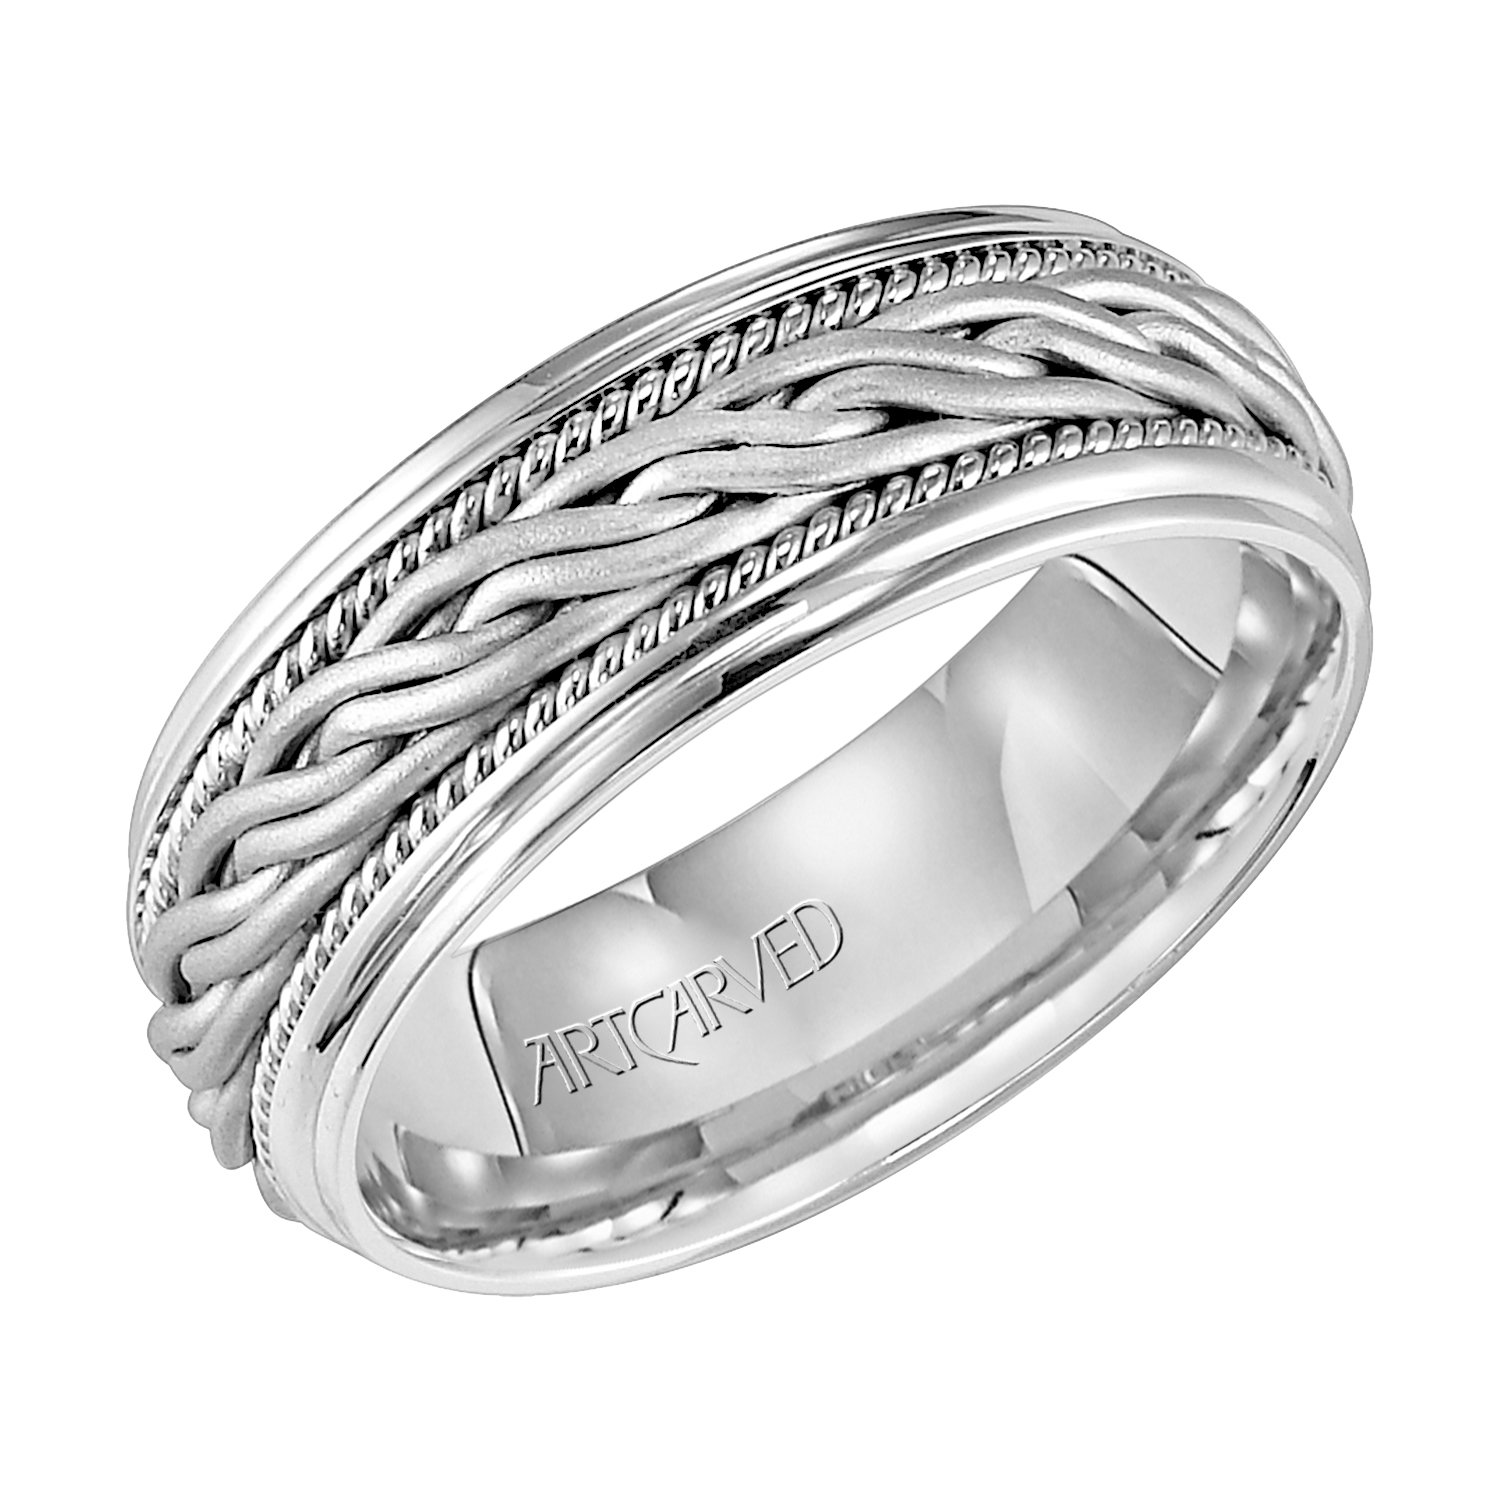 5mm Wide 18ct White Gold Ring - King Street Design